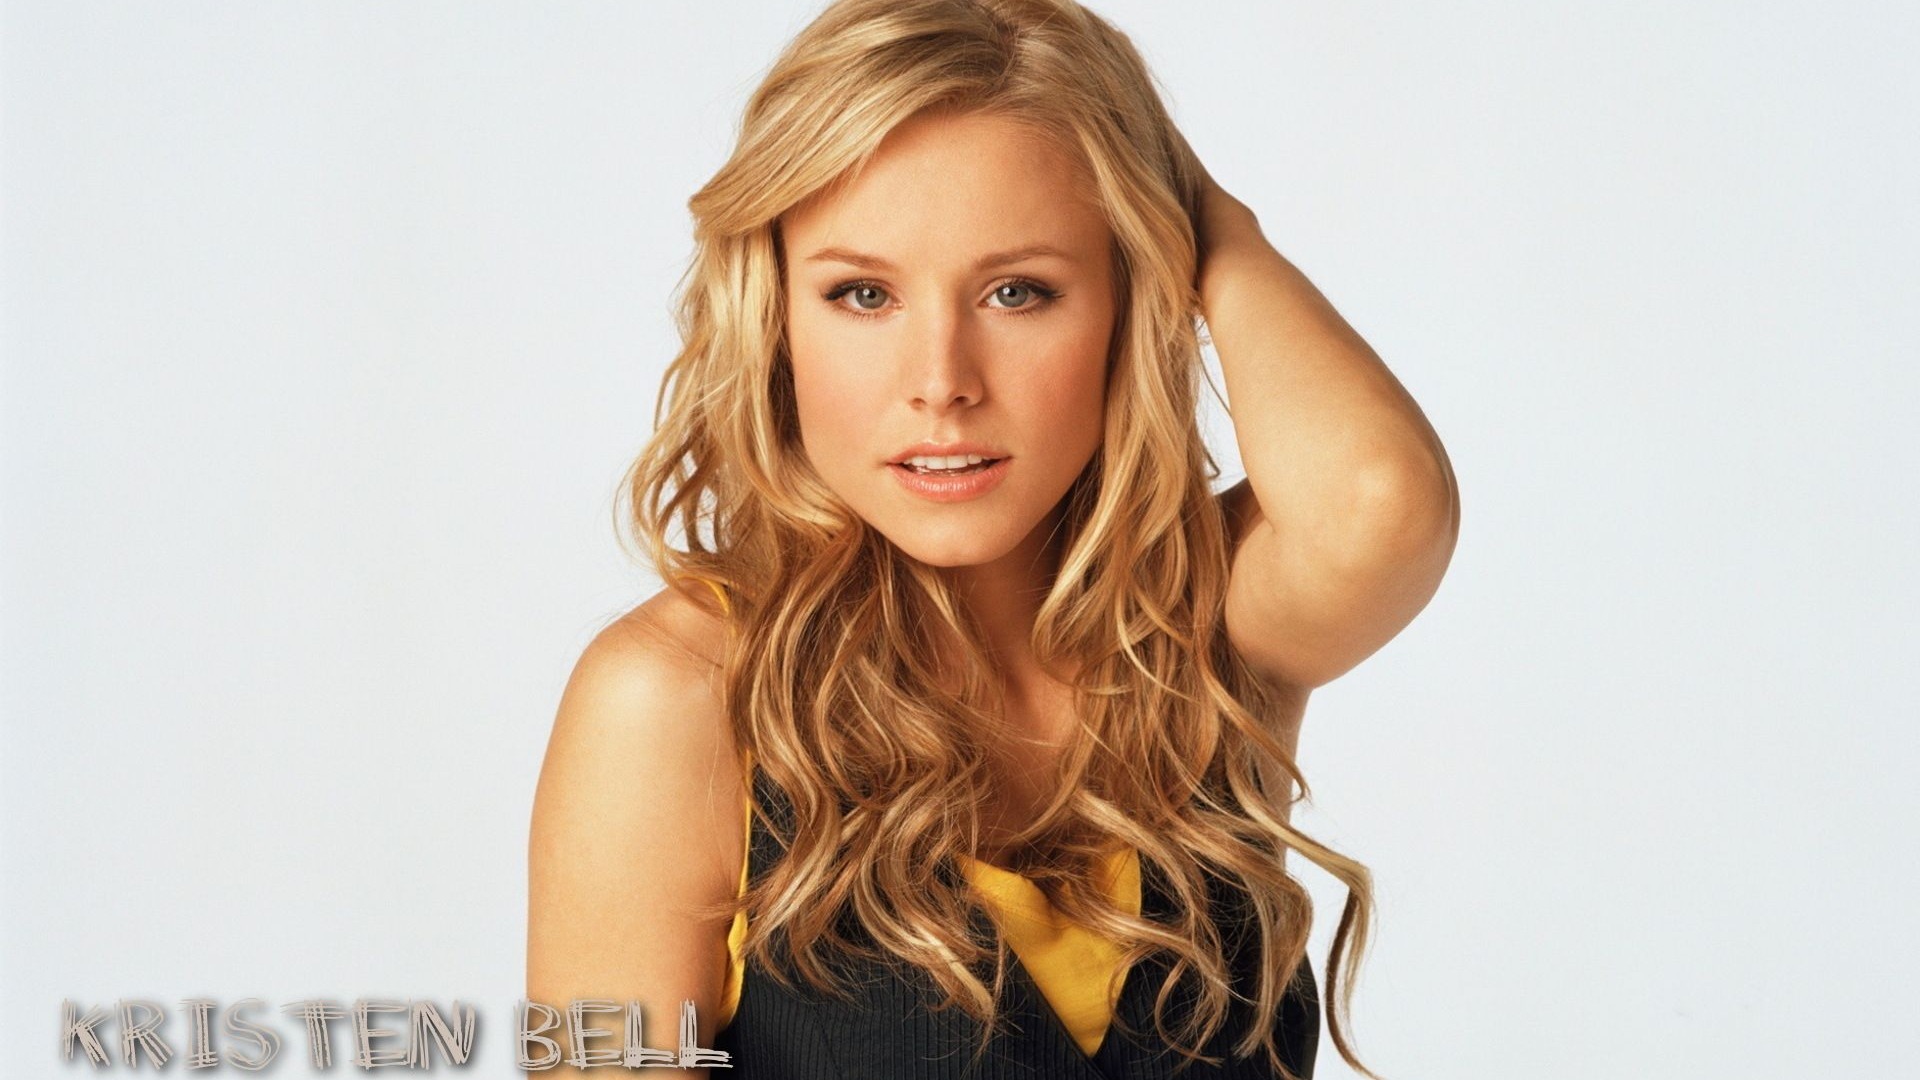 Kristen Bell #054 - 1920x1080 Wallpapers Pictures Photos Images